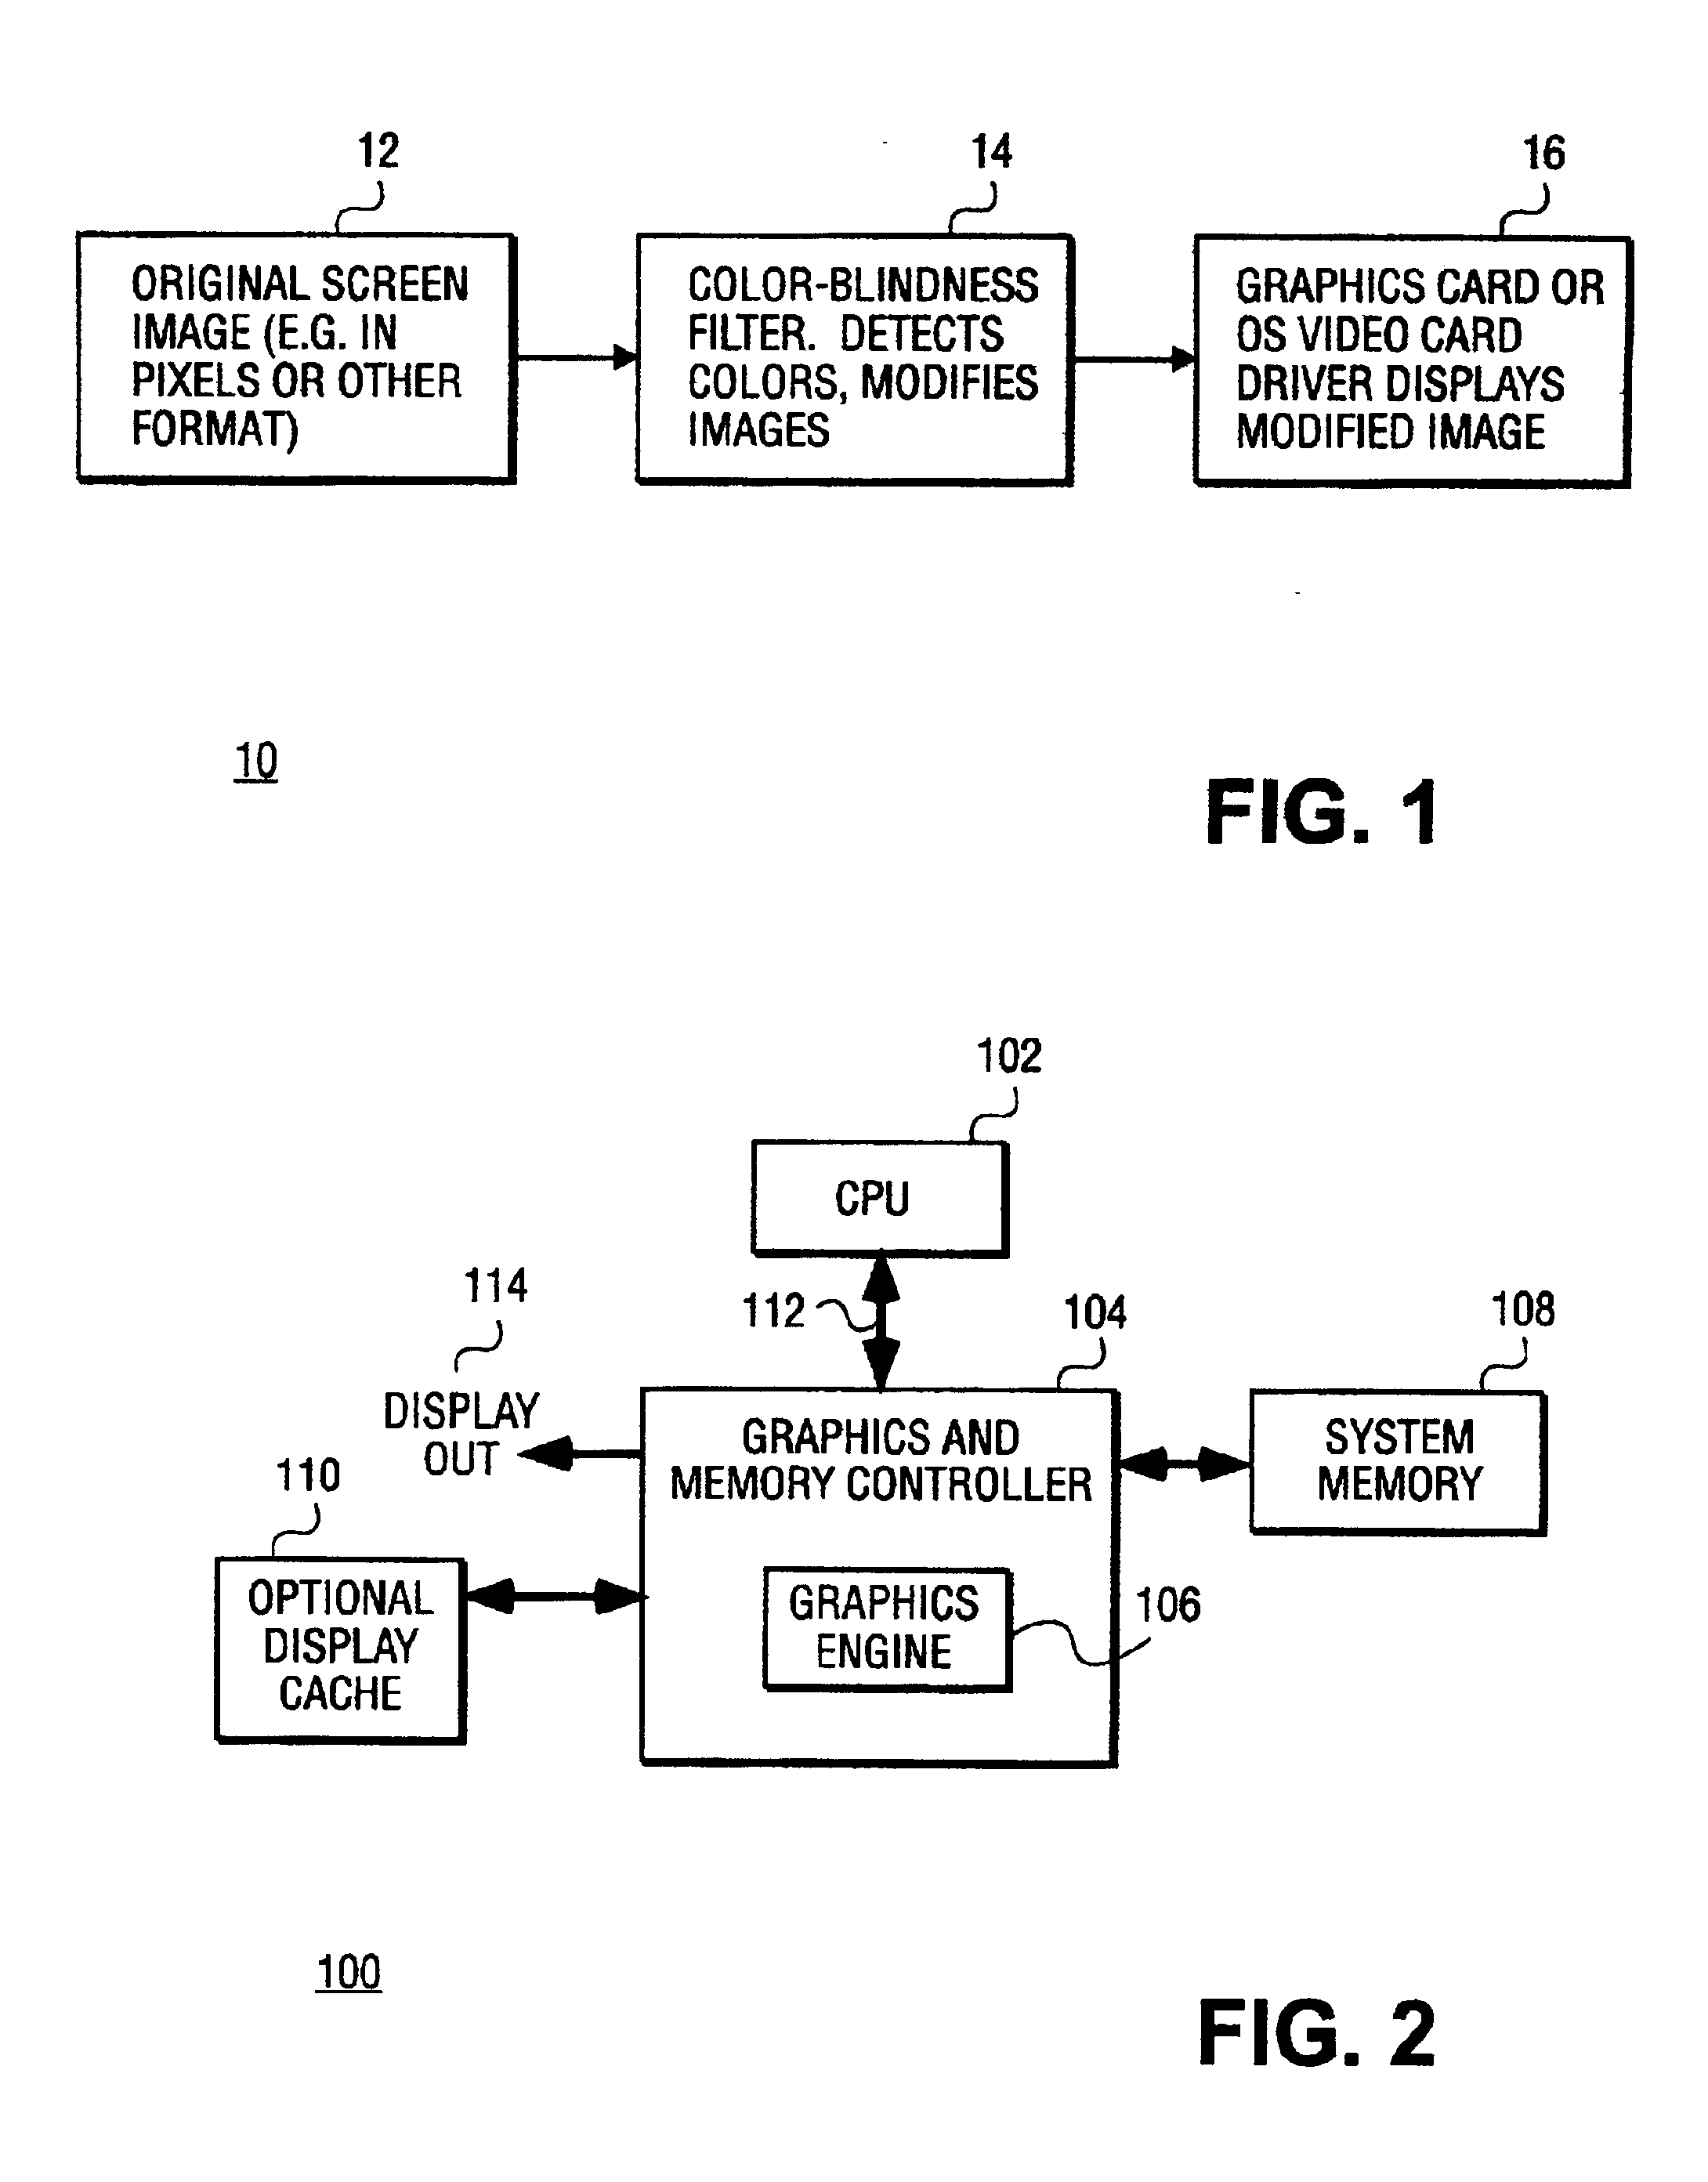 Method and apparatus for modifying graphics content prior to display for color blind use